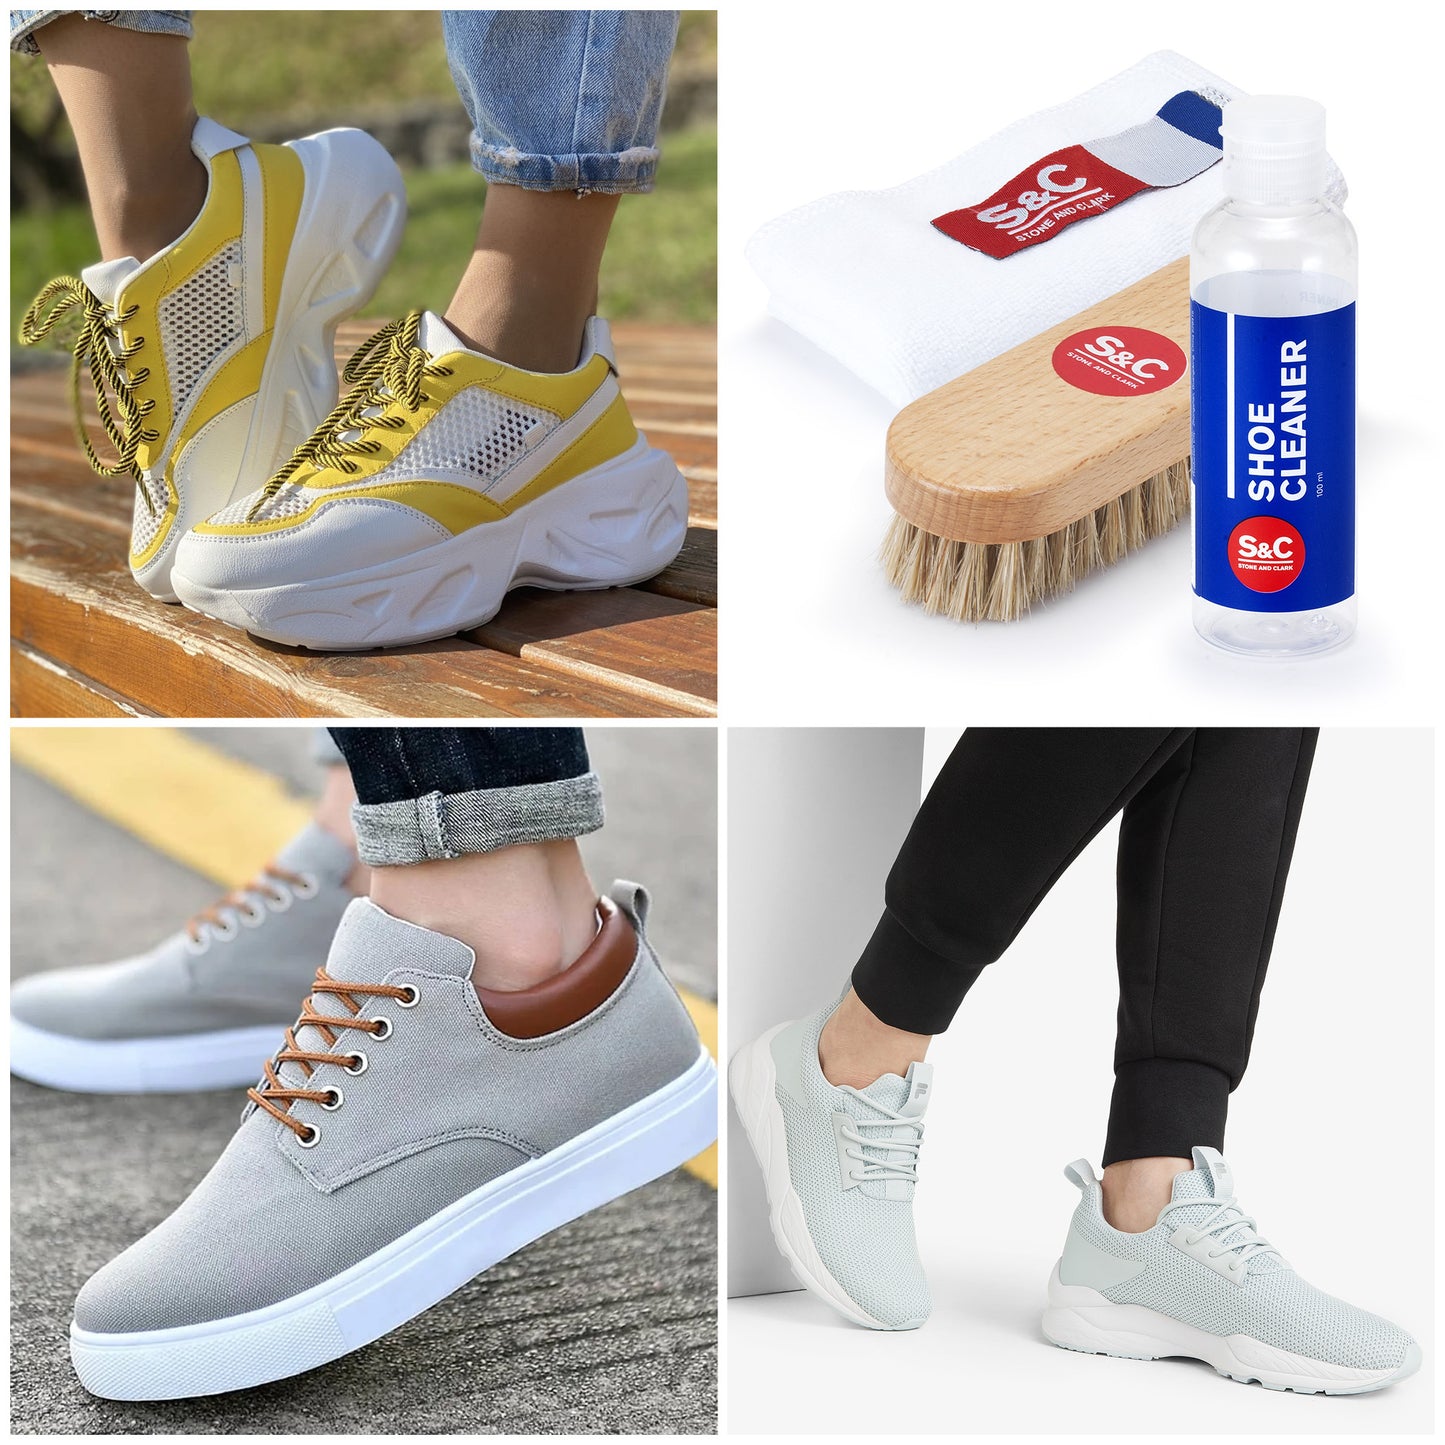 Compact Sneaker Cleaner: Easy On-the-Go Kit